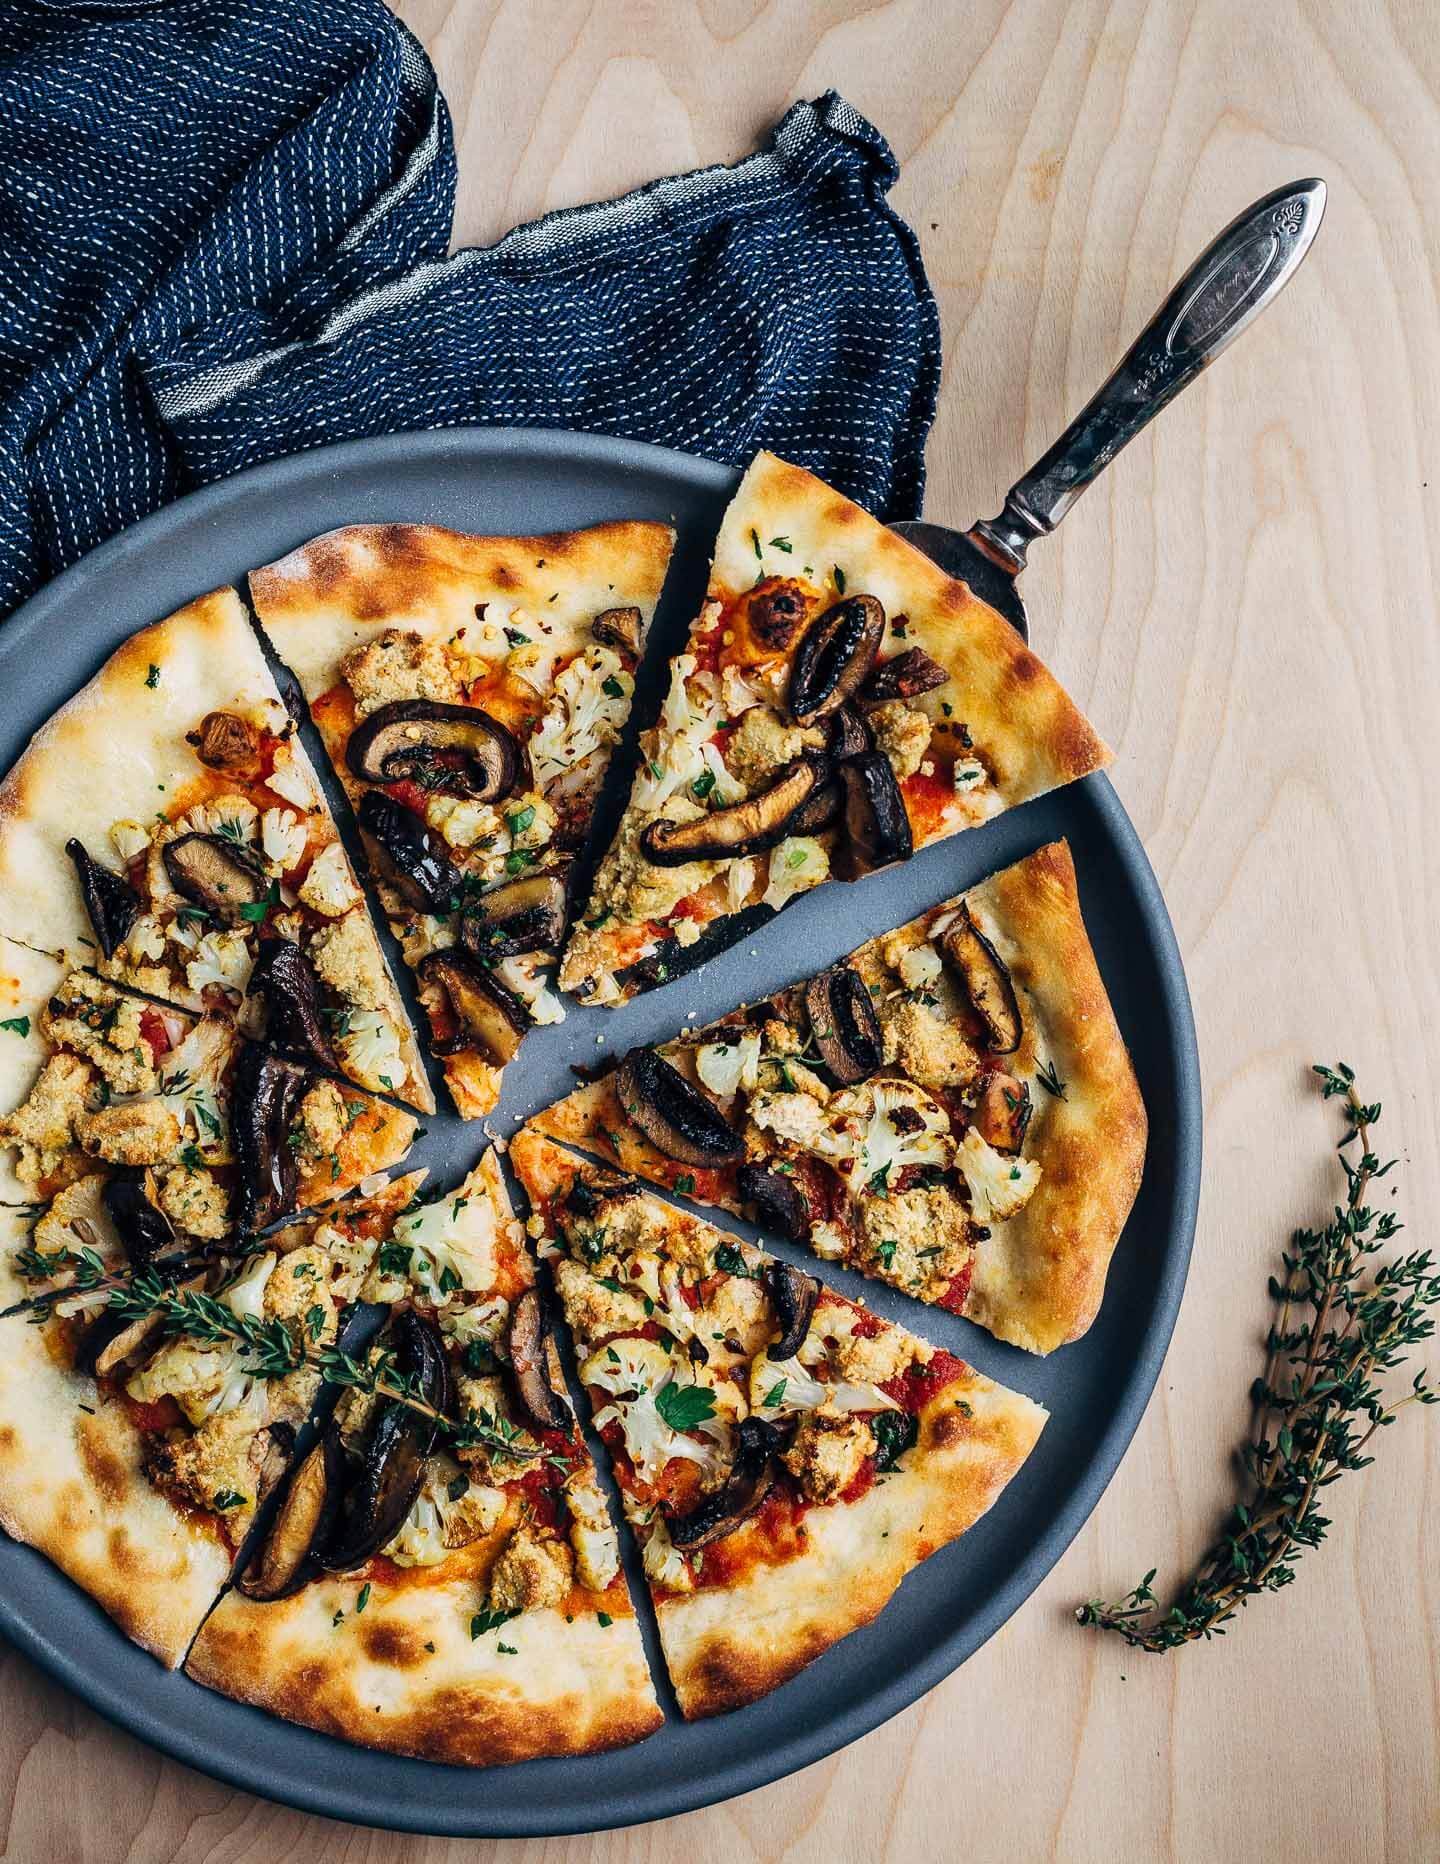 A super flavorful vegan pizza recipe featuring roasted cauliflower and mushrooms, fresh herbs, and a sunflower seed-nutritional yeast topping.